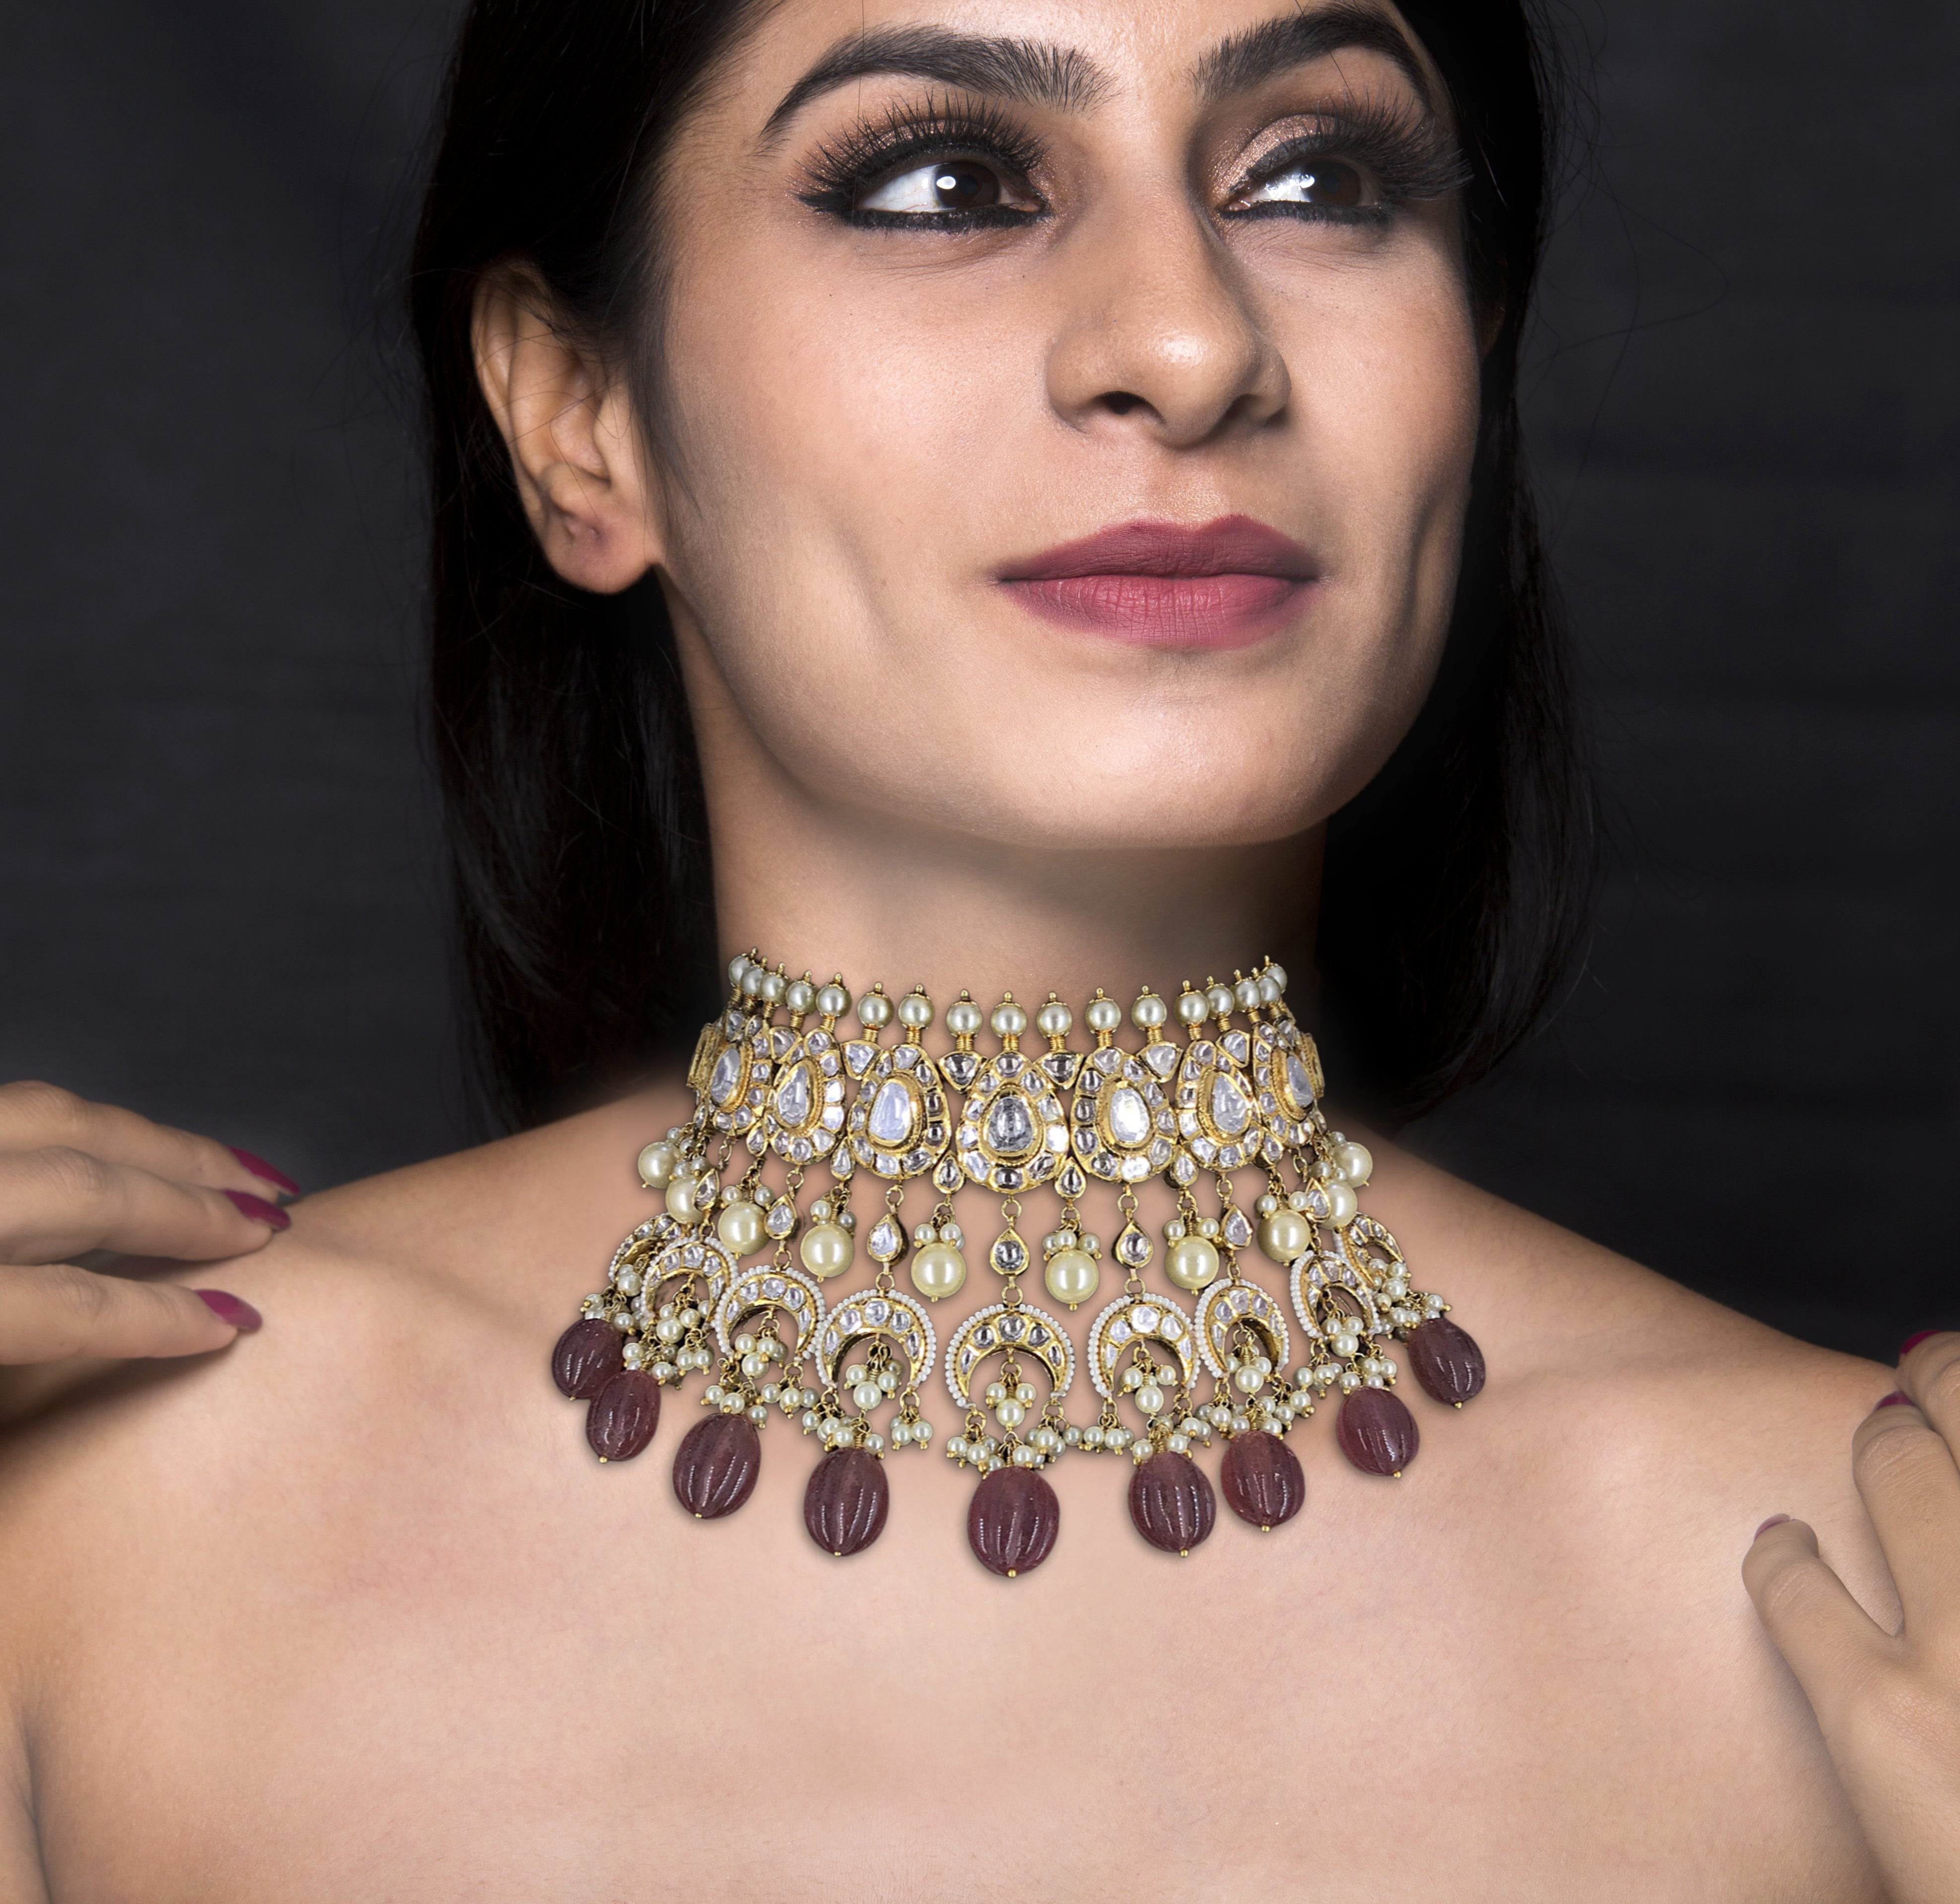 18k Gold and Diamond Polki Choker Necklace Set with pear-shaped motifs enhanced by hand-carved Strawberry Quartz Melons and Pearls